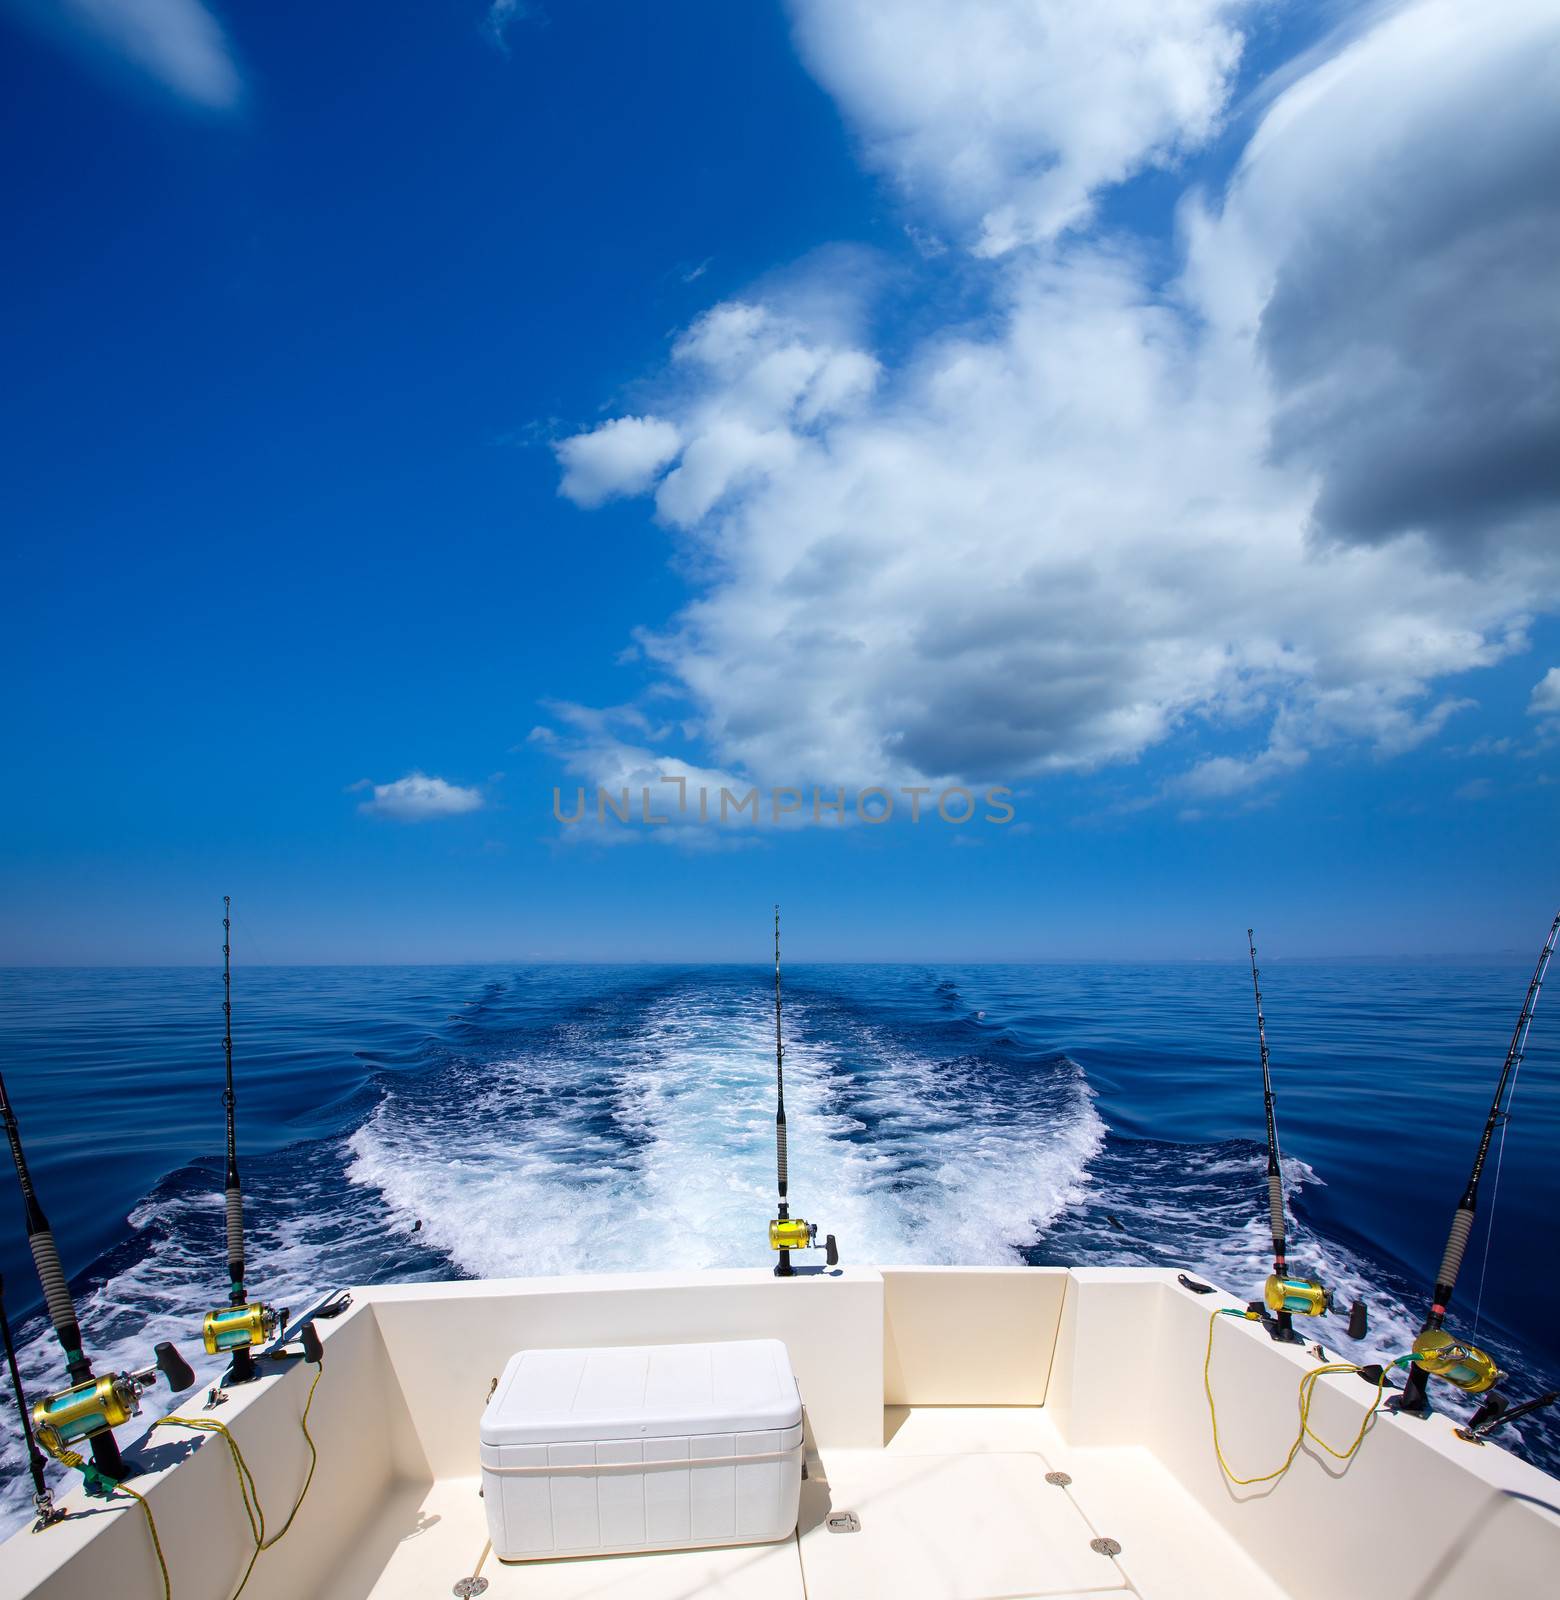 Fishing boat stern deck with trolling fishing rods and reels by lunamarina